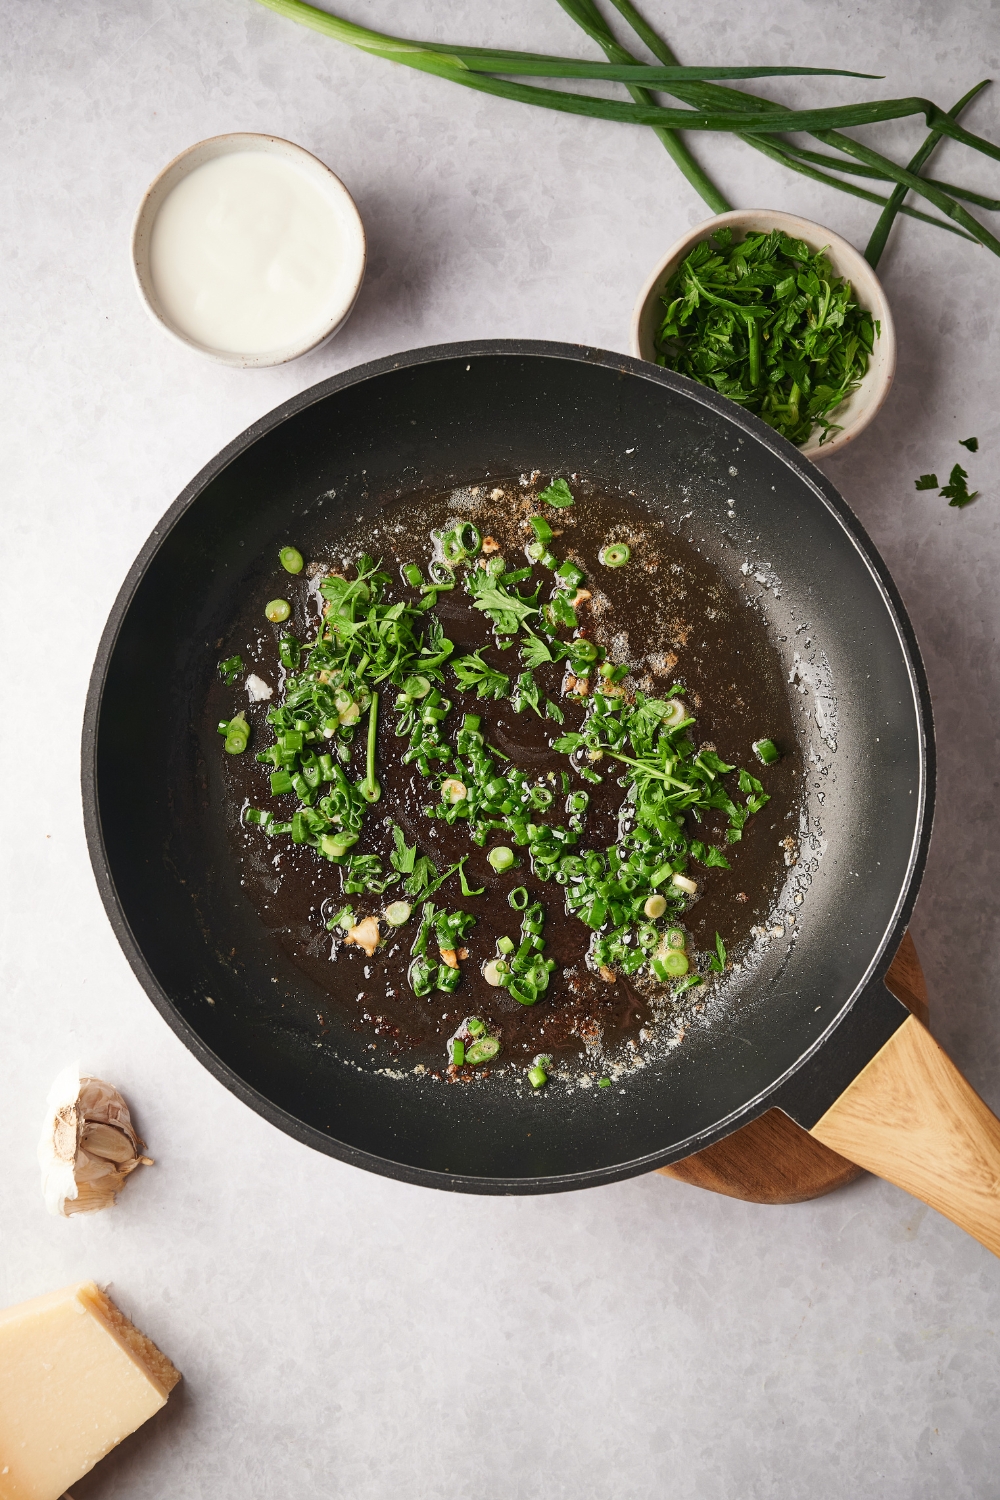 A skillet with fresh herbs, garlic, and green onion cooking in it.